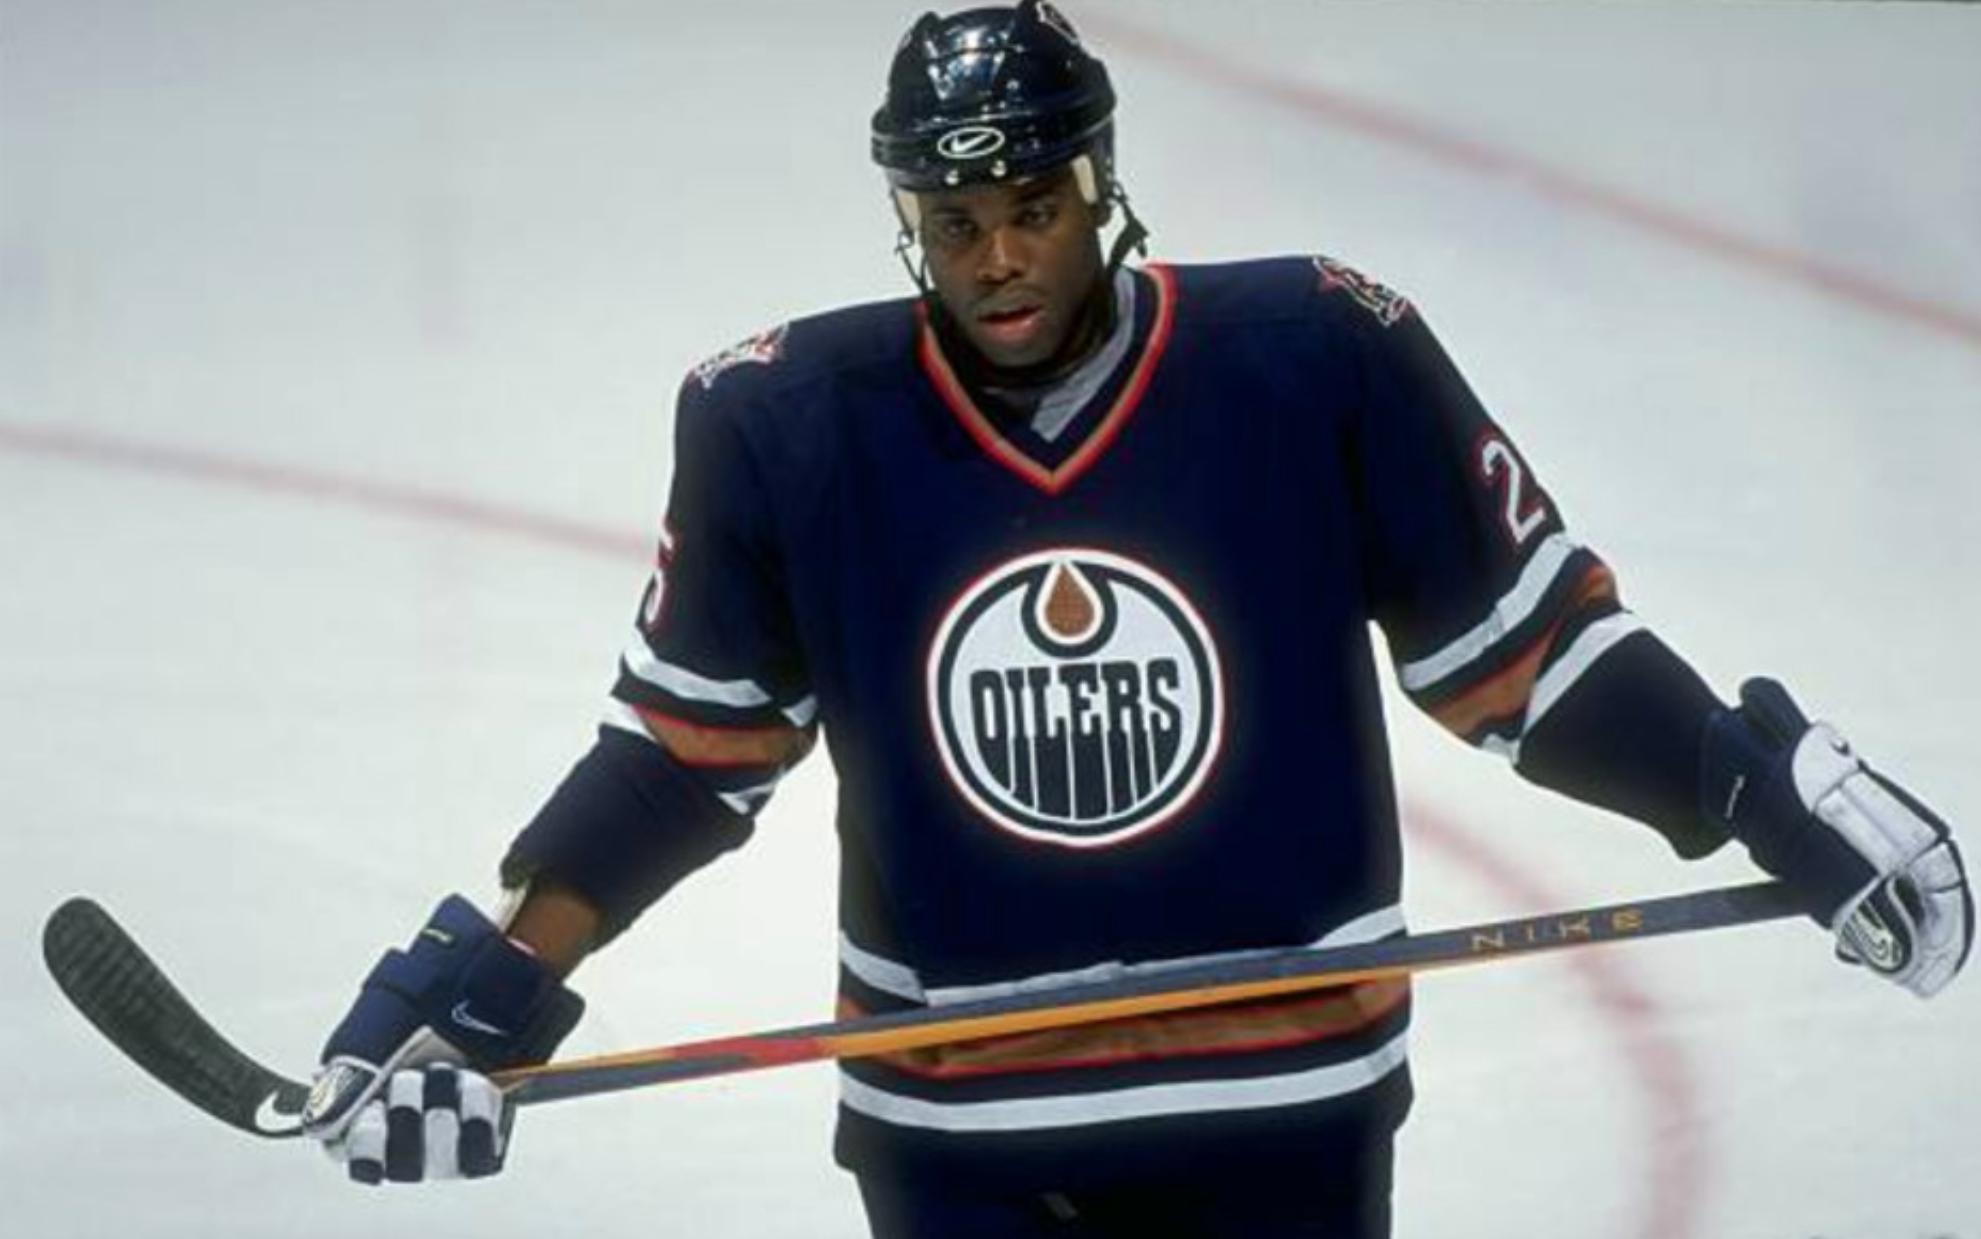 Mike Grier The First Black NHL General Manager